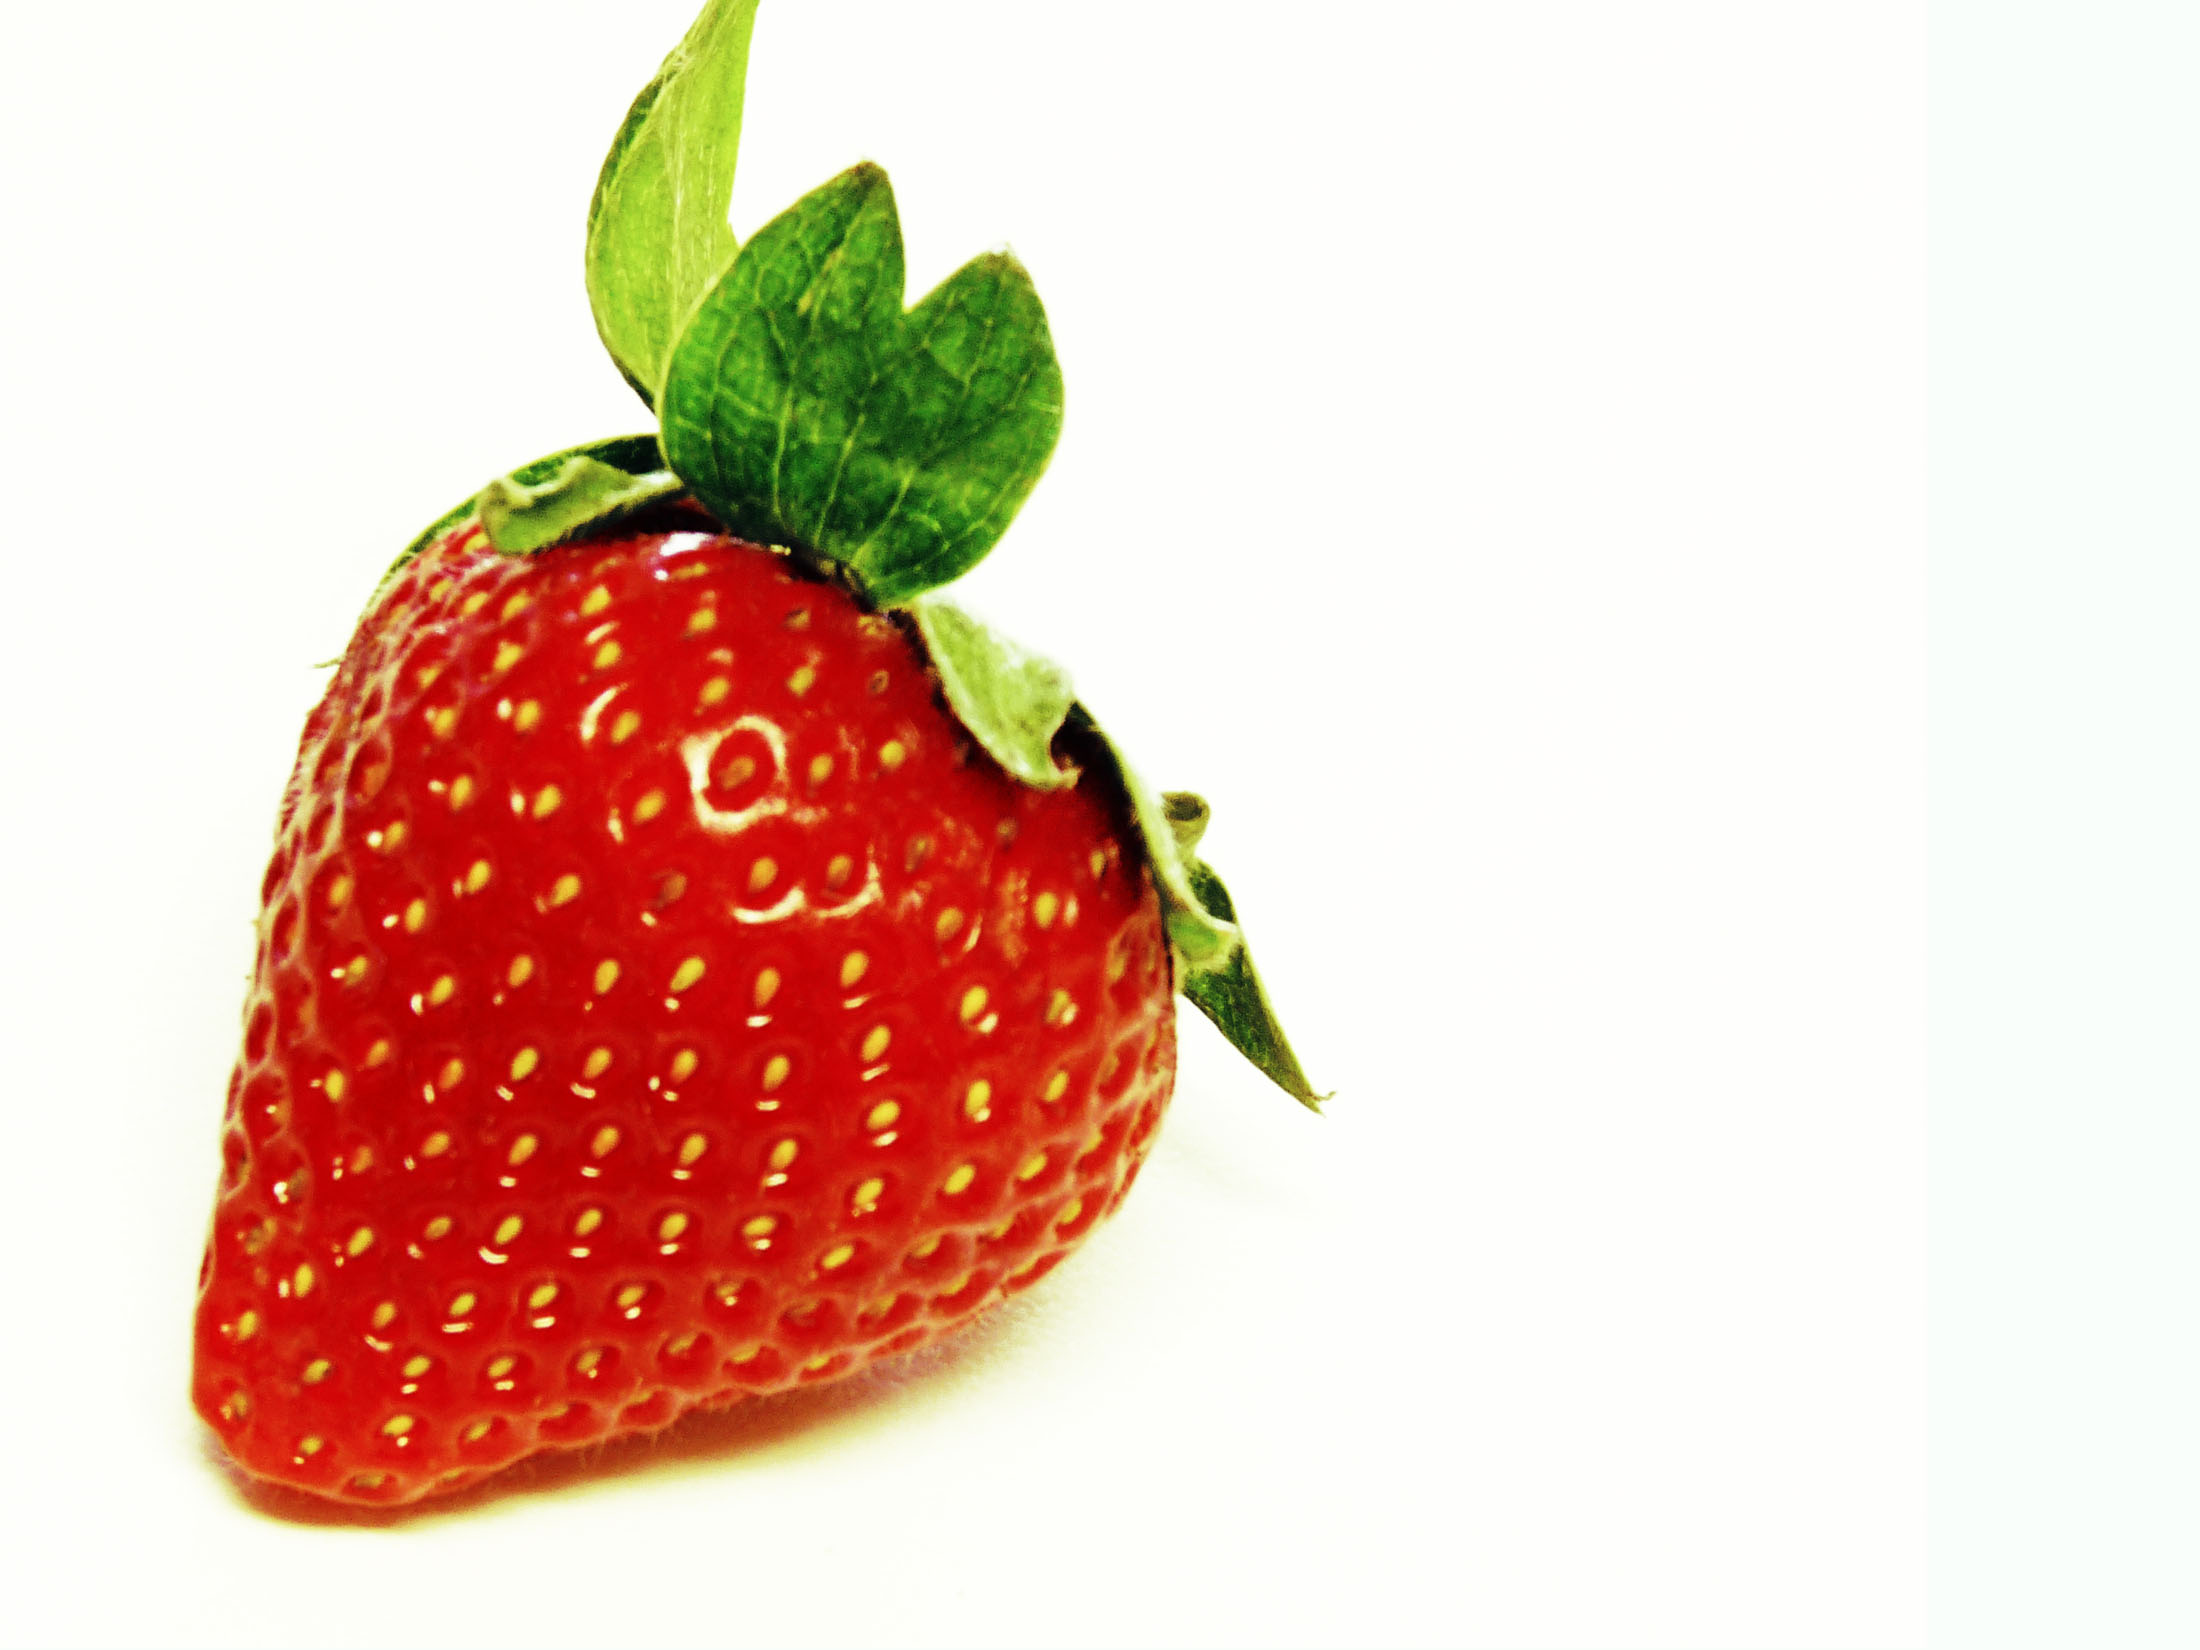 an image of a large strawberry with the leaves still attached